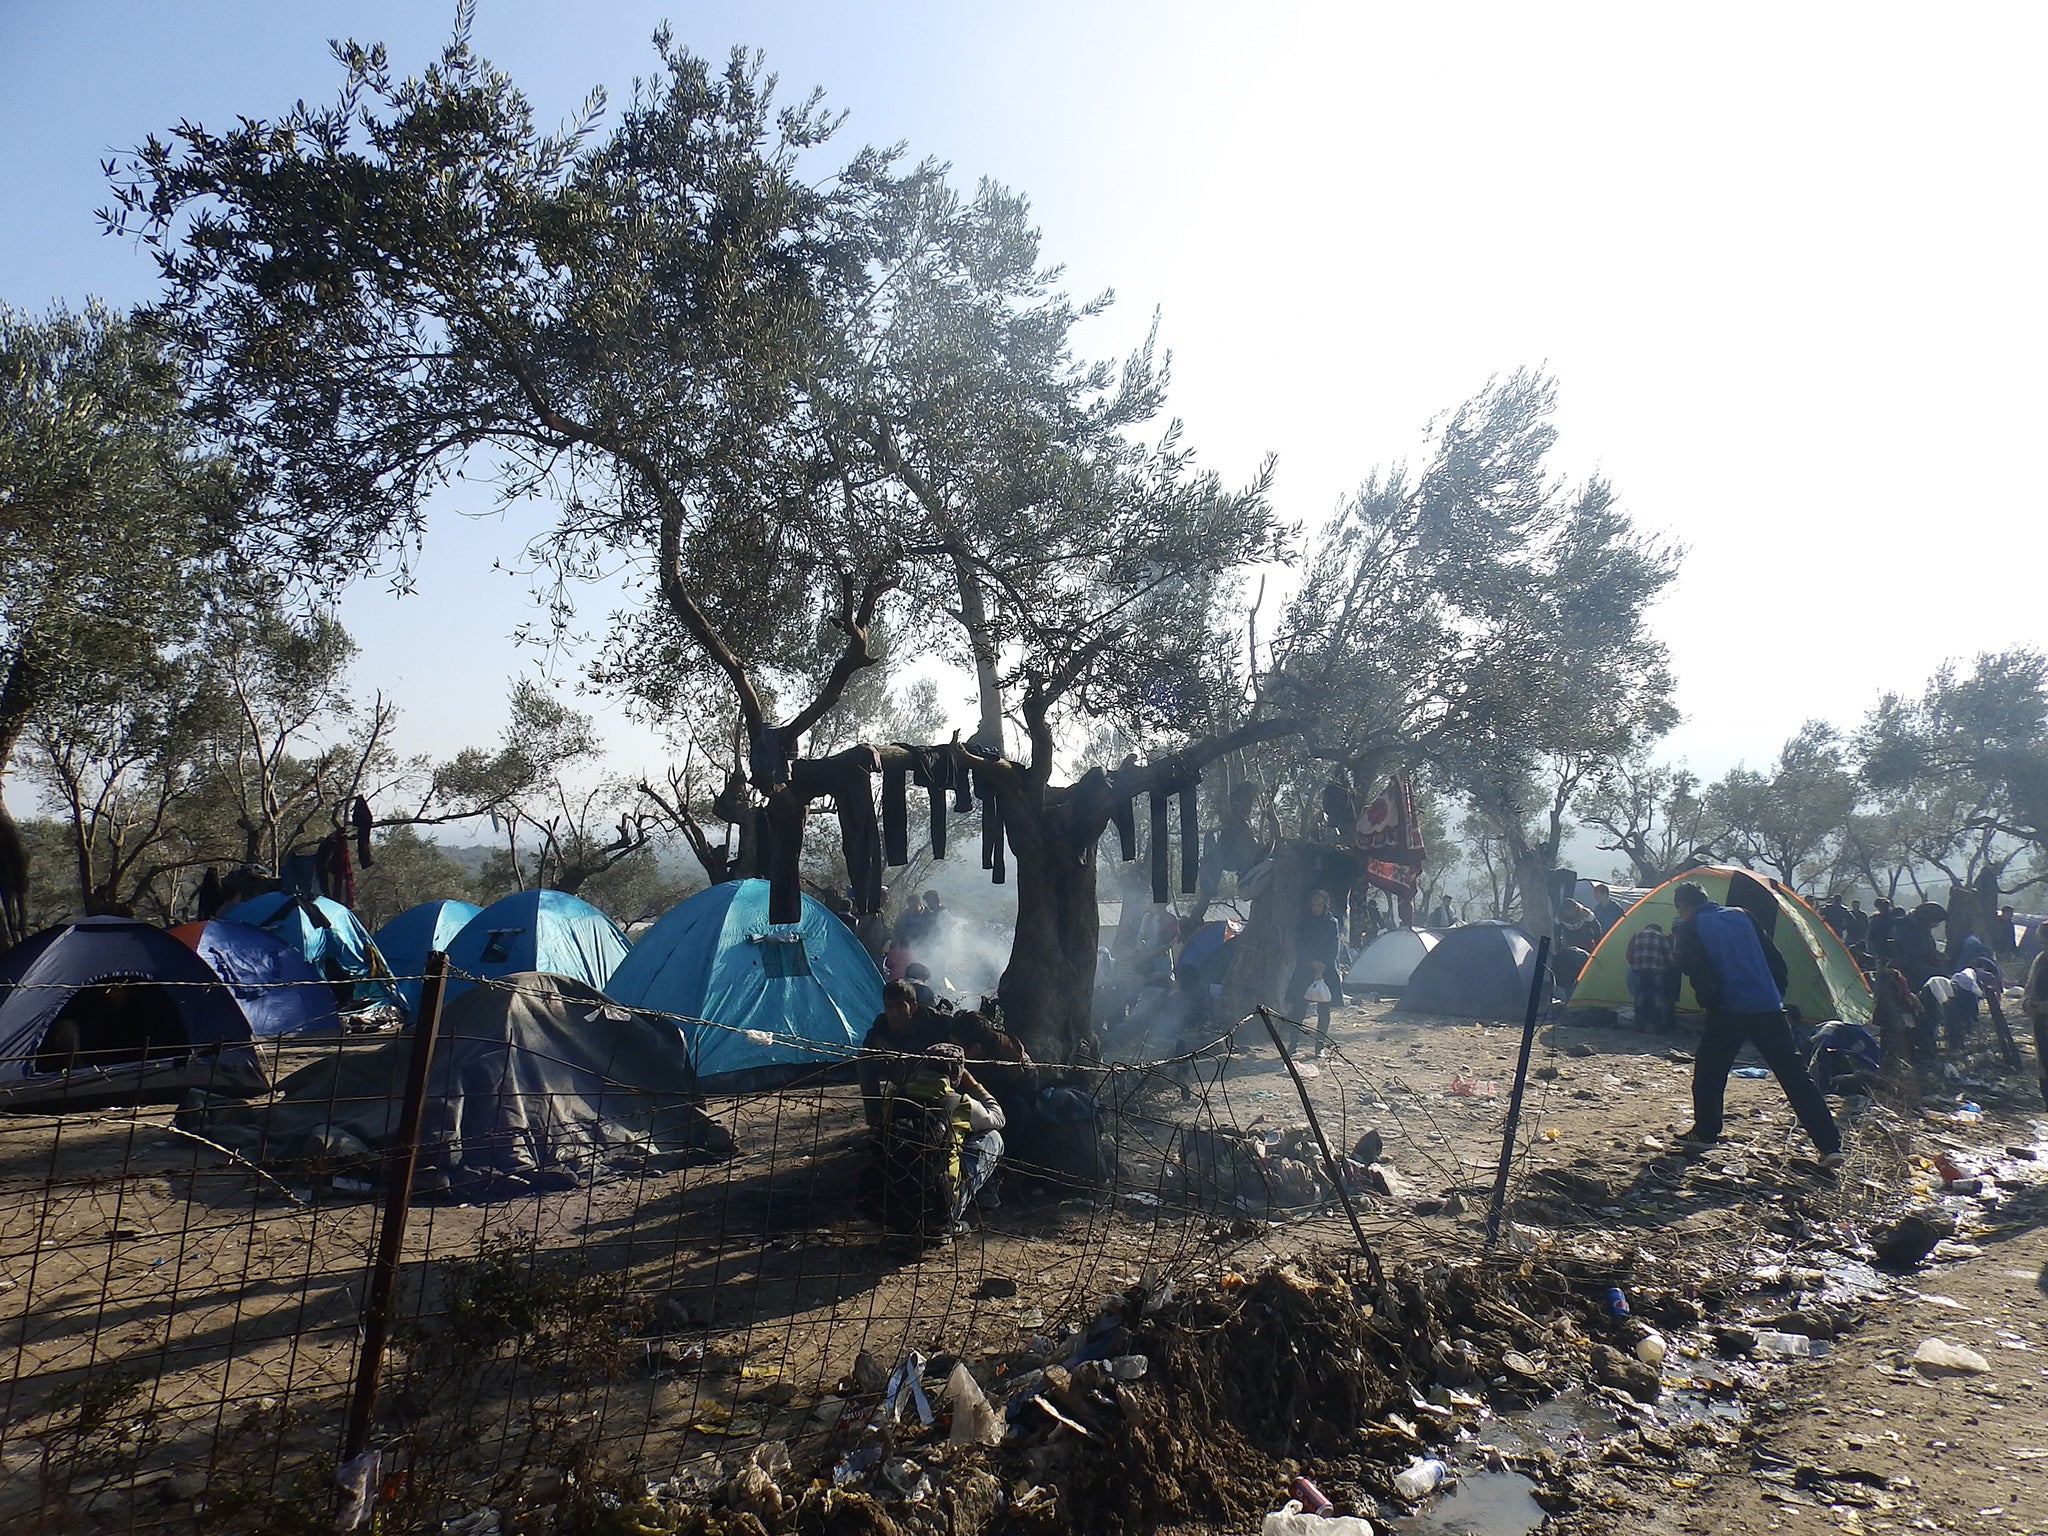 A scene from the Moria refugee camp on Lesbos